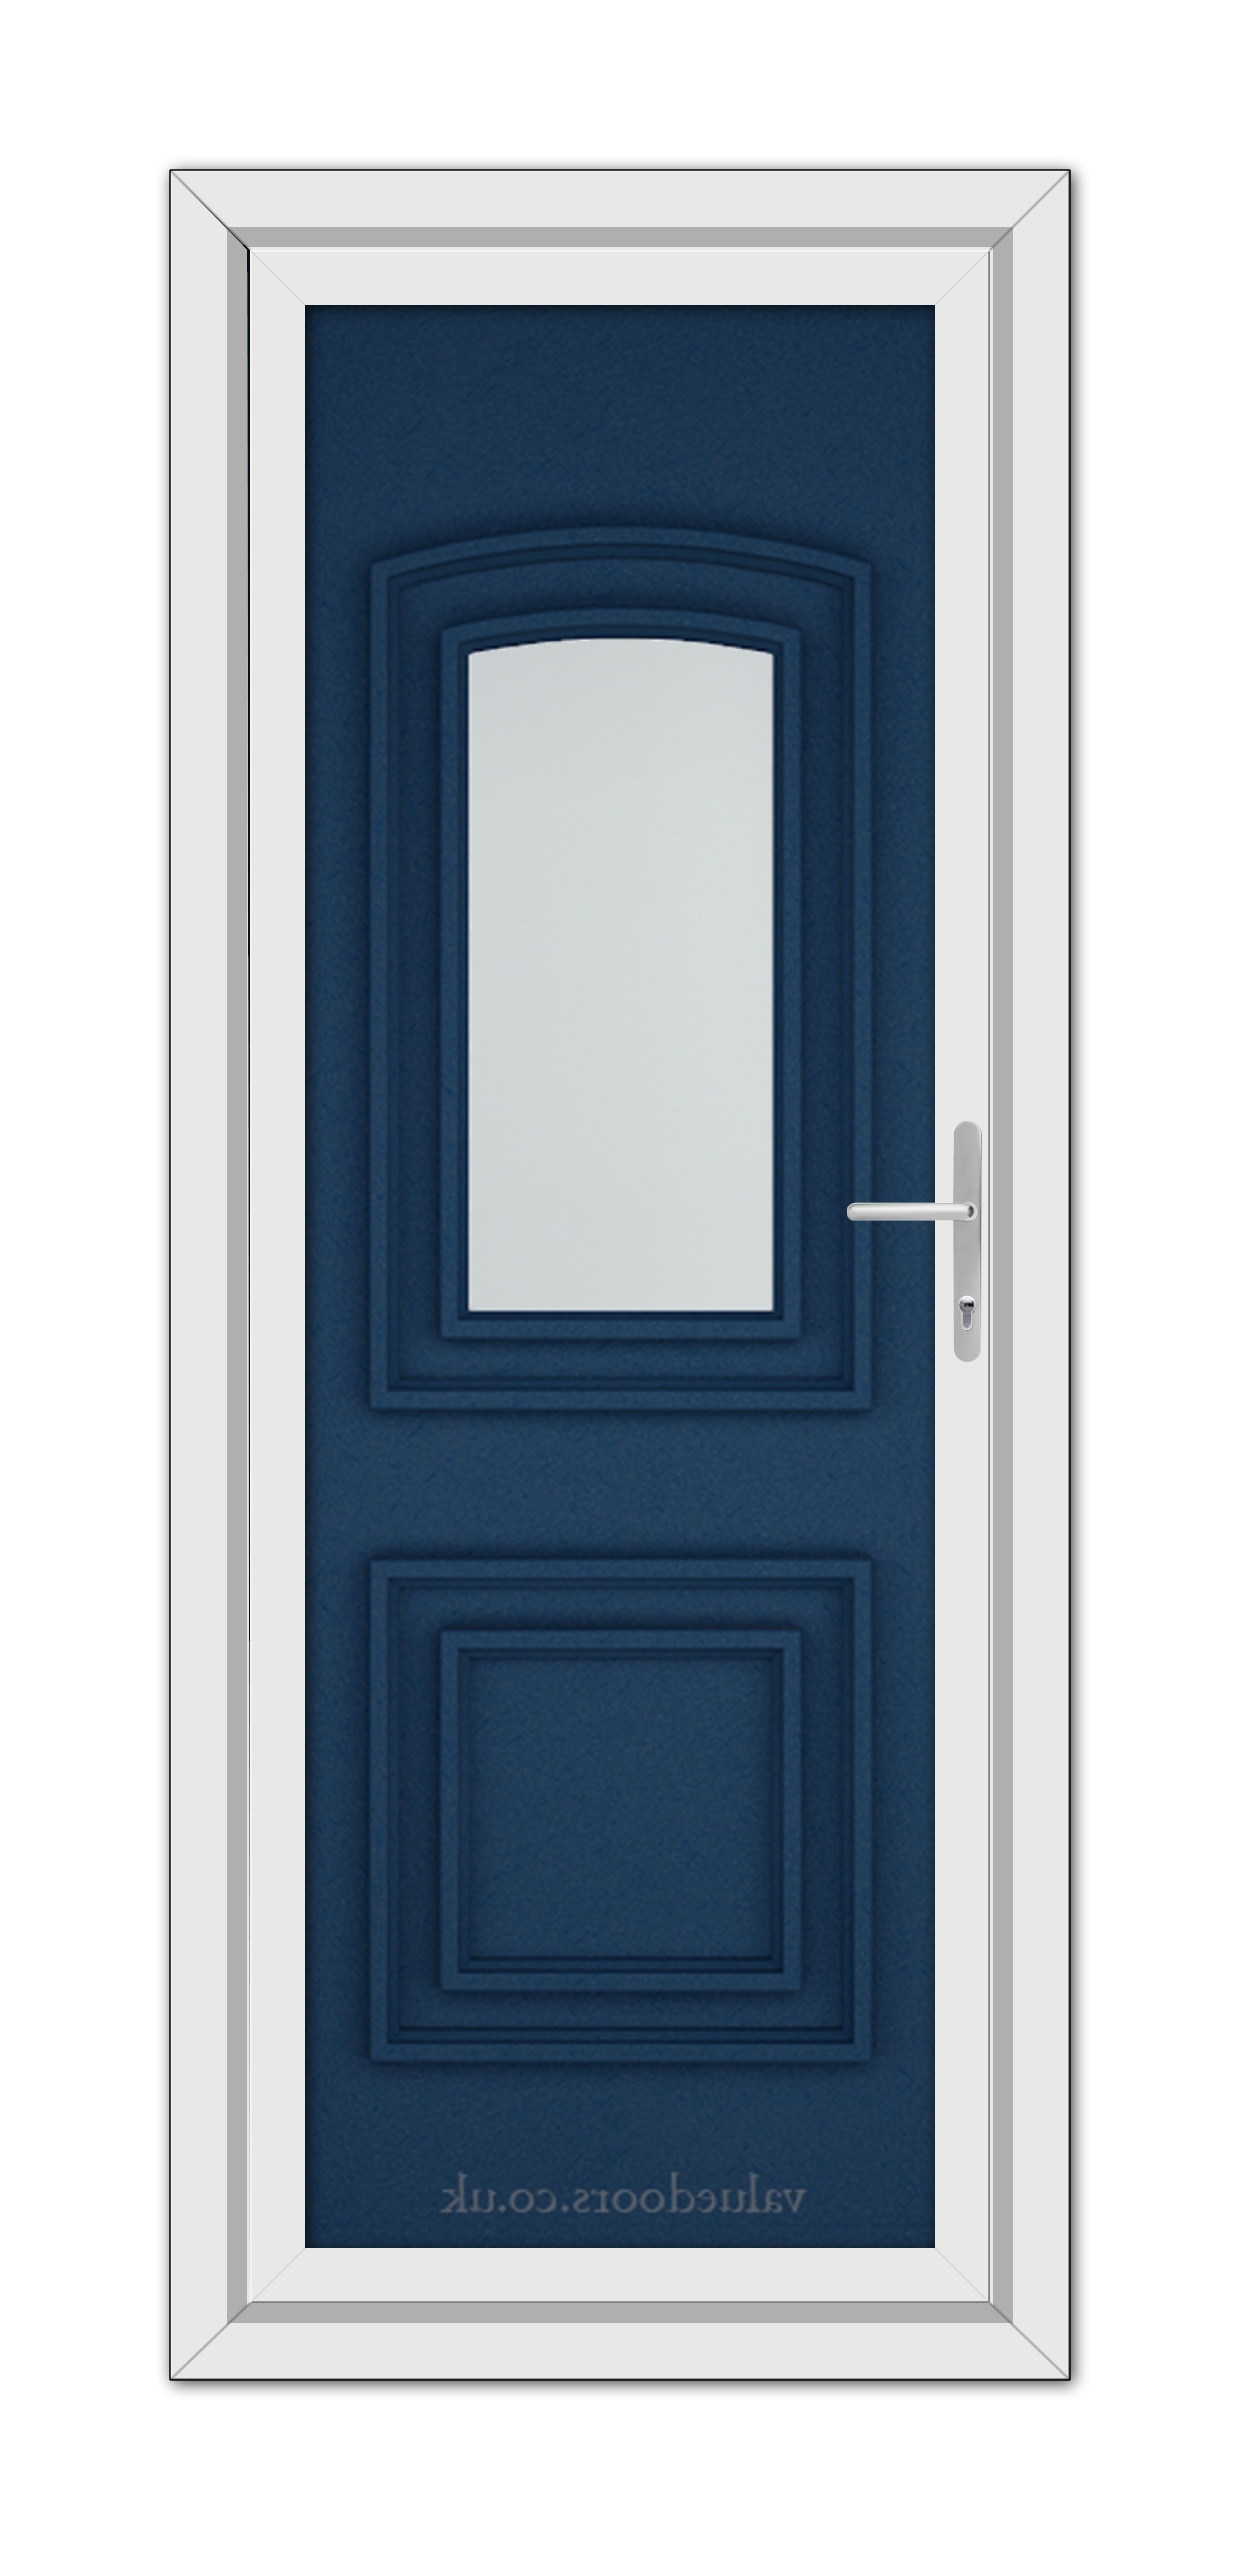 A vertical image of a closed Blue Balmoral One uPVC Door with a white rectangular window and a metallic handle, set within a white door frame.